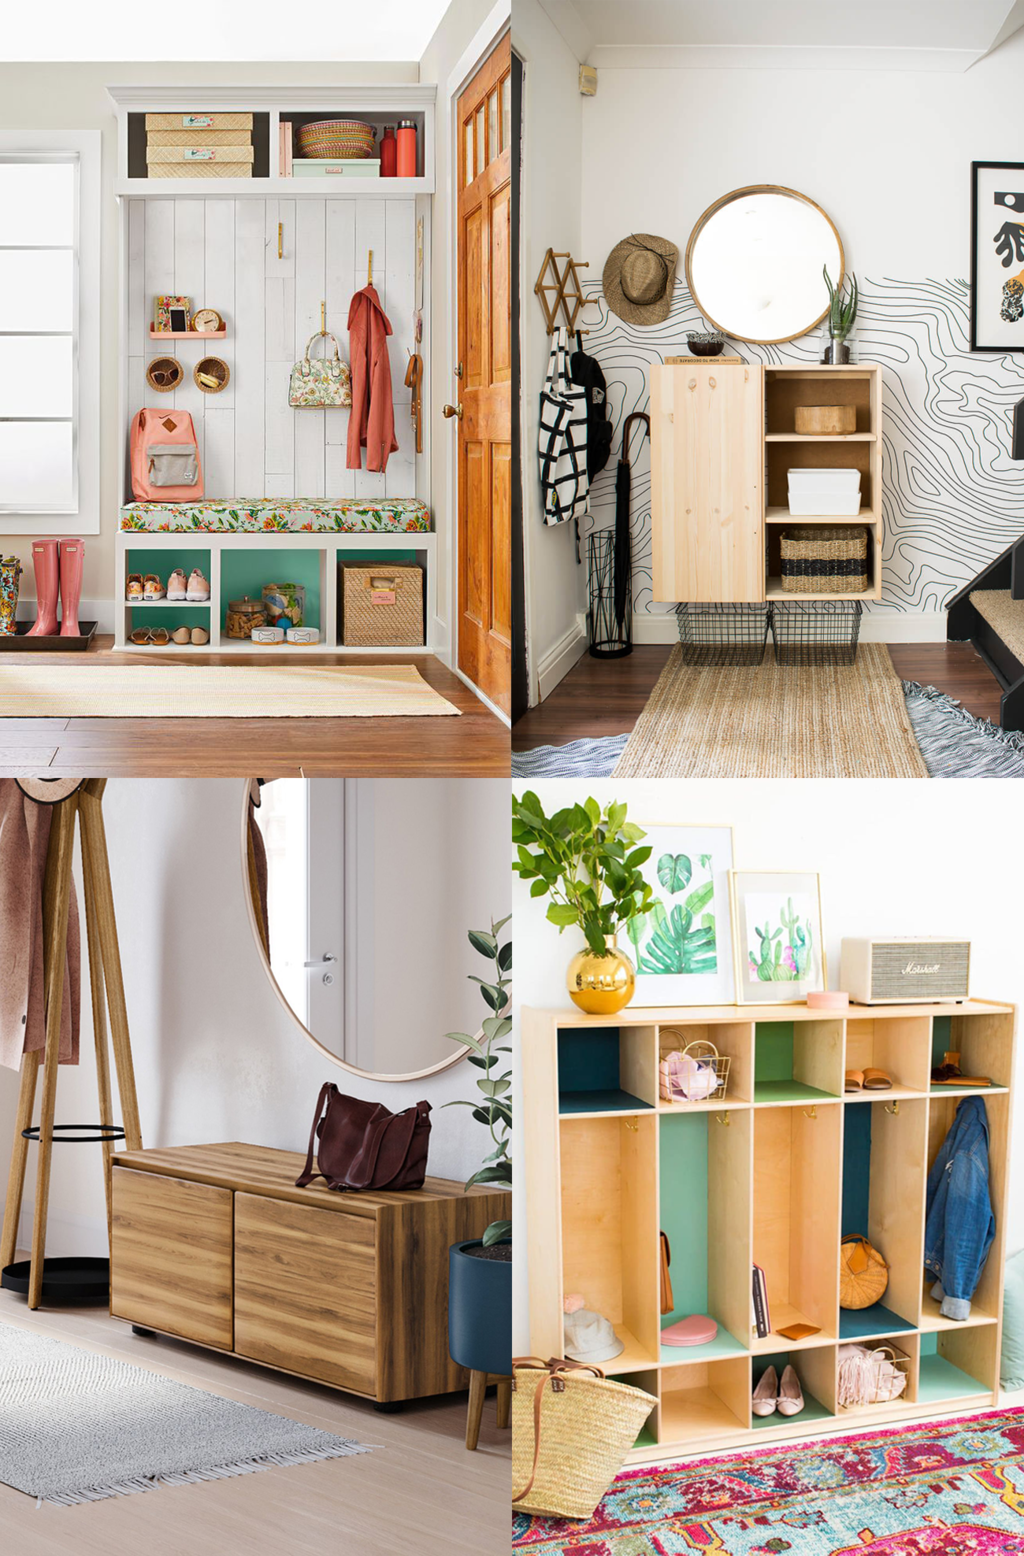 15 Entryway Storage Ideas to Tame Your Cluttered Chaos